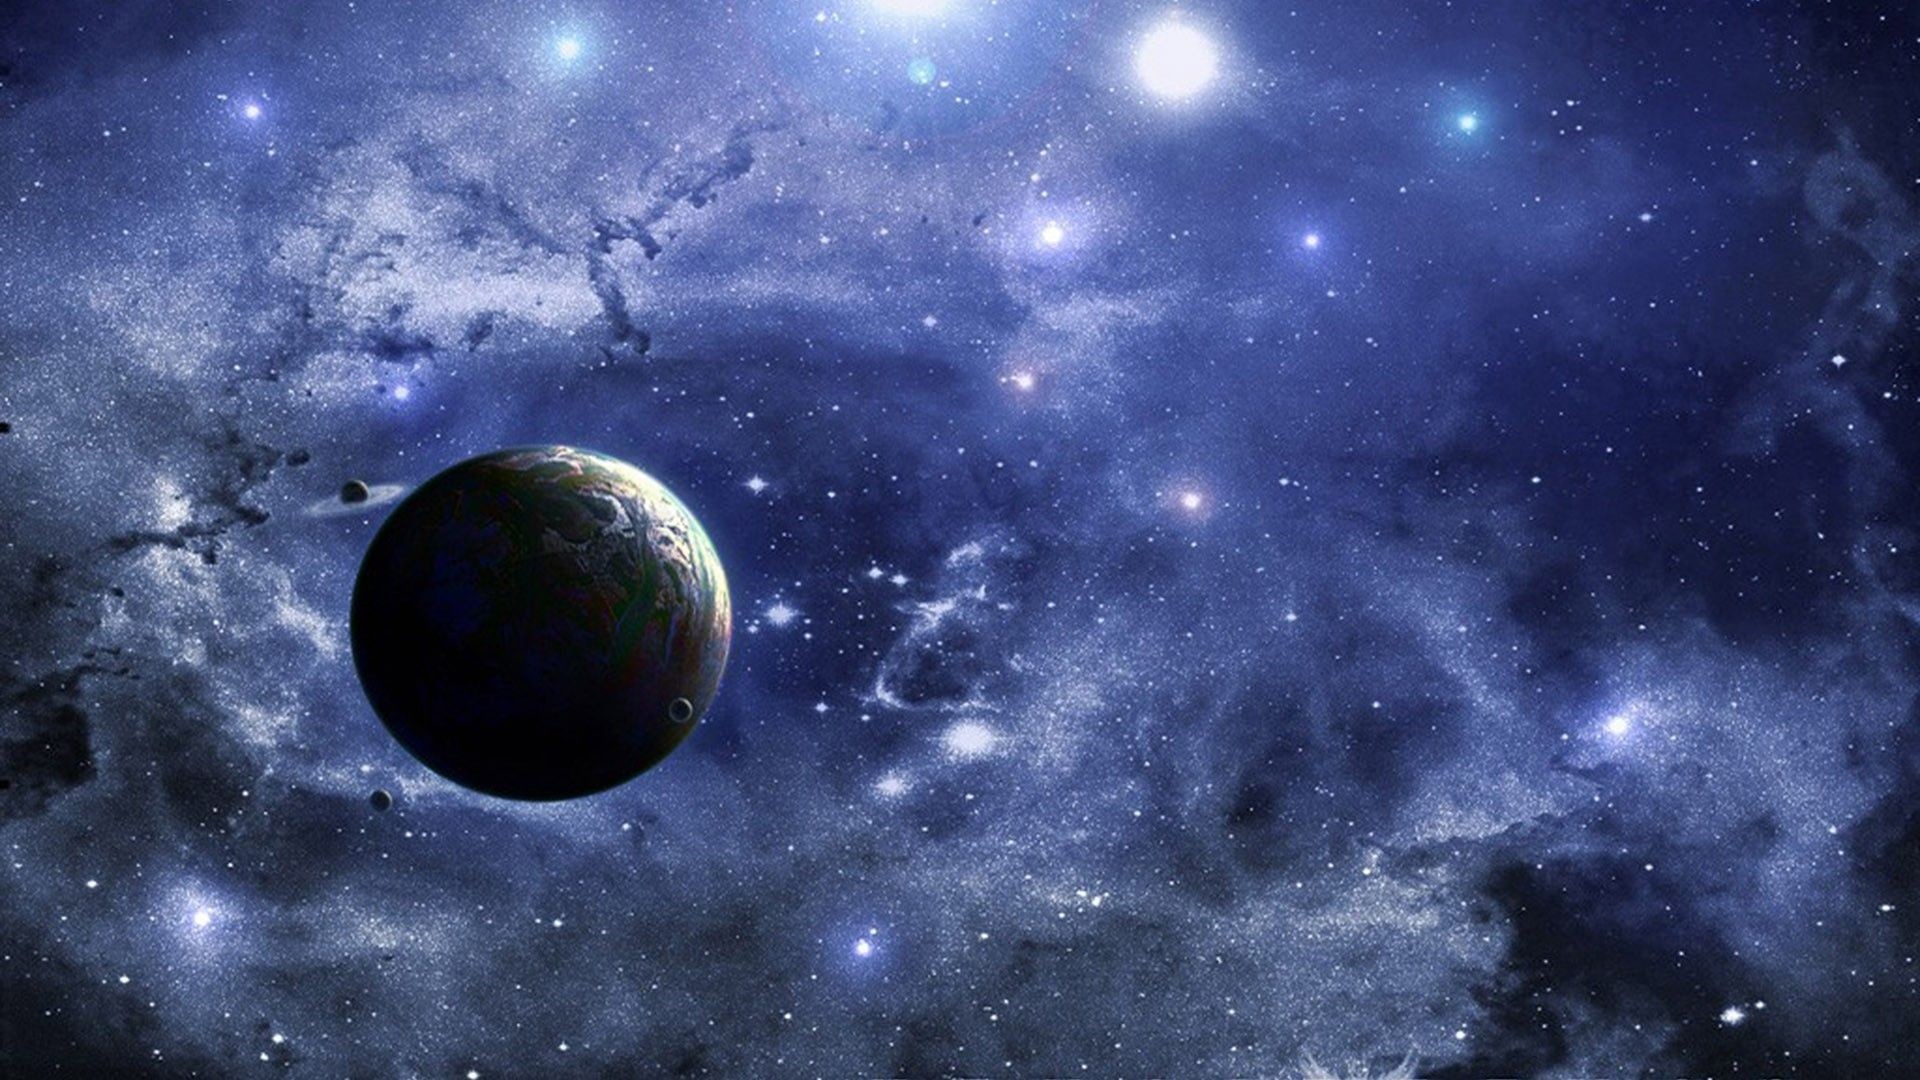 1920x1080 Stars and moon wallpaper 3d hd pictures.